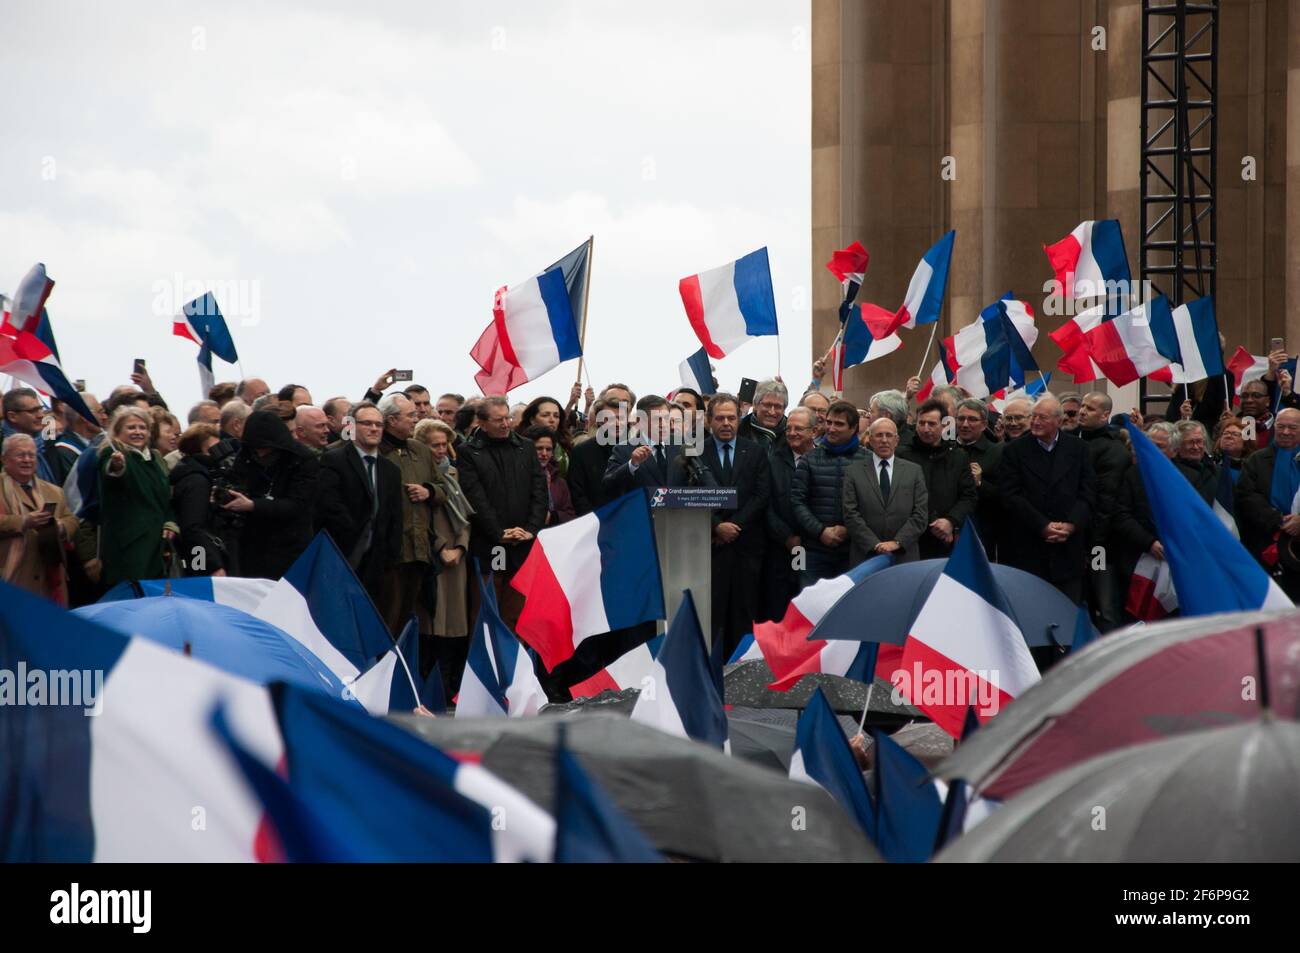 PARIS, FRANCE - MARCH 5, 2017 :  Rally to support French presidential election right wing candidate François Fillon at Trocadero. Stock Photo